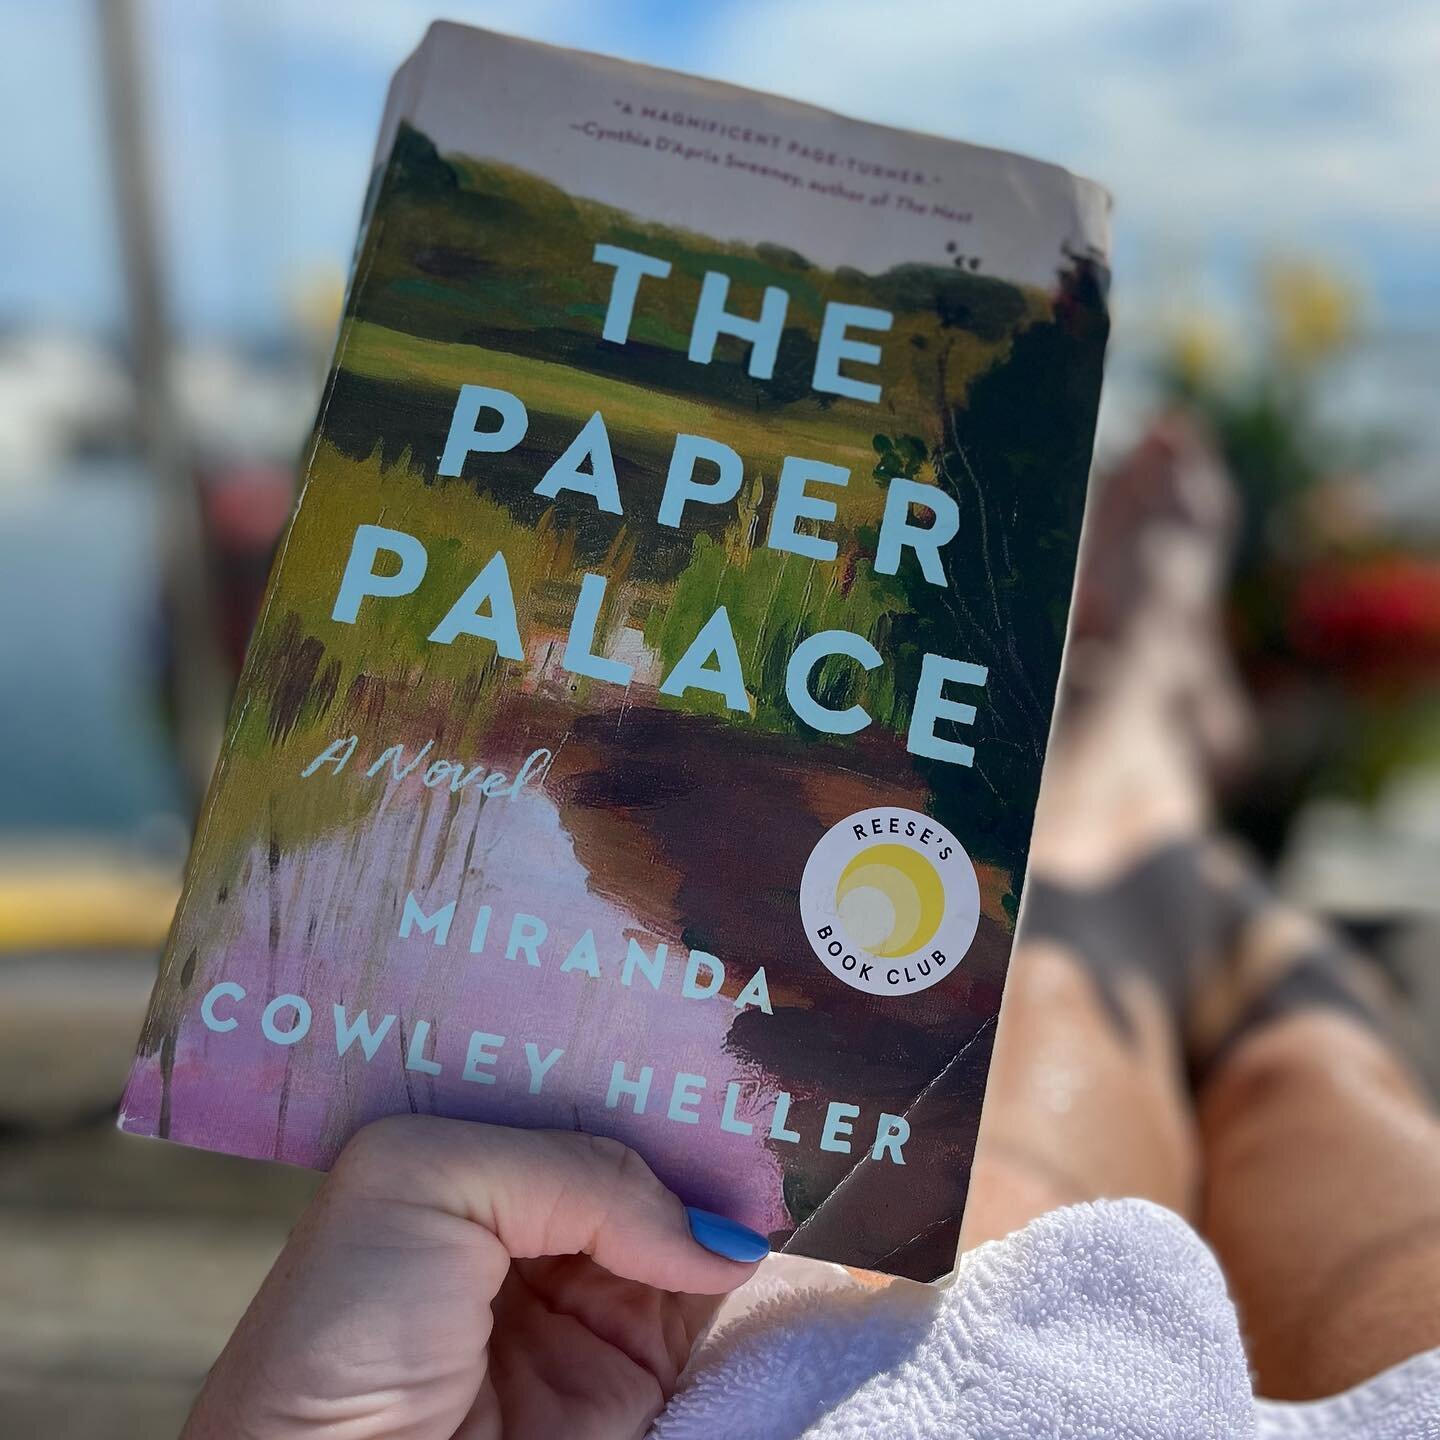 Wow. This book. ⭐️ ⭐️ ⭐️ ⭐️ ⭐️ #paperpalace @mirandacowleyhellerauthor